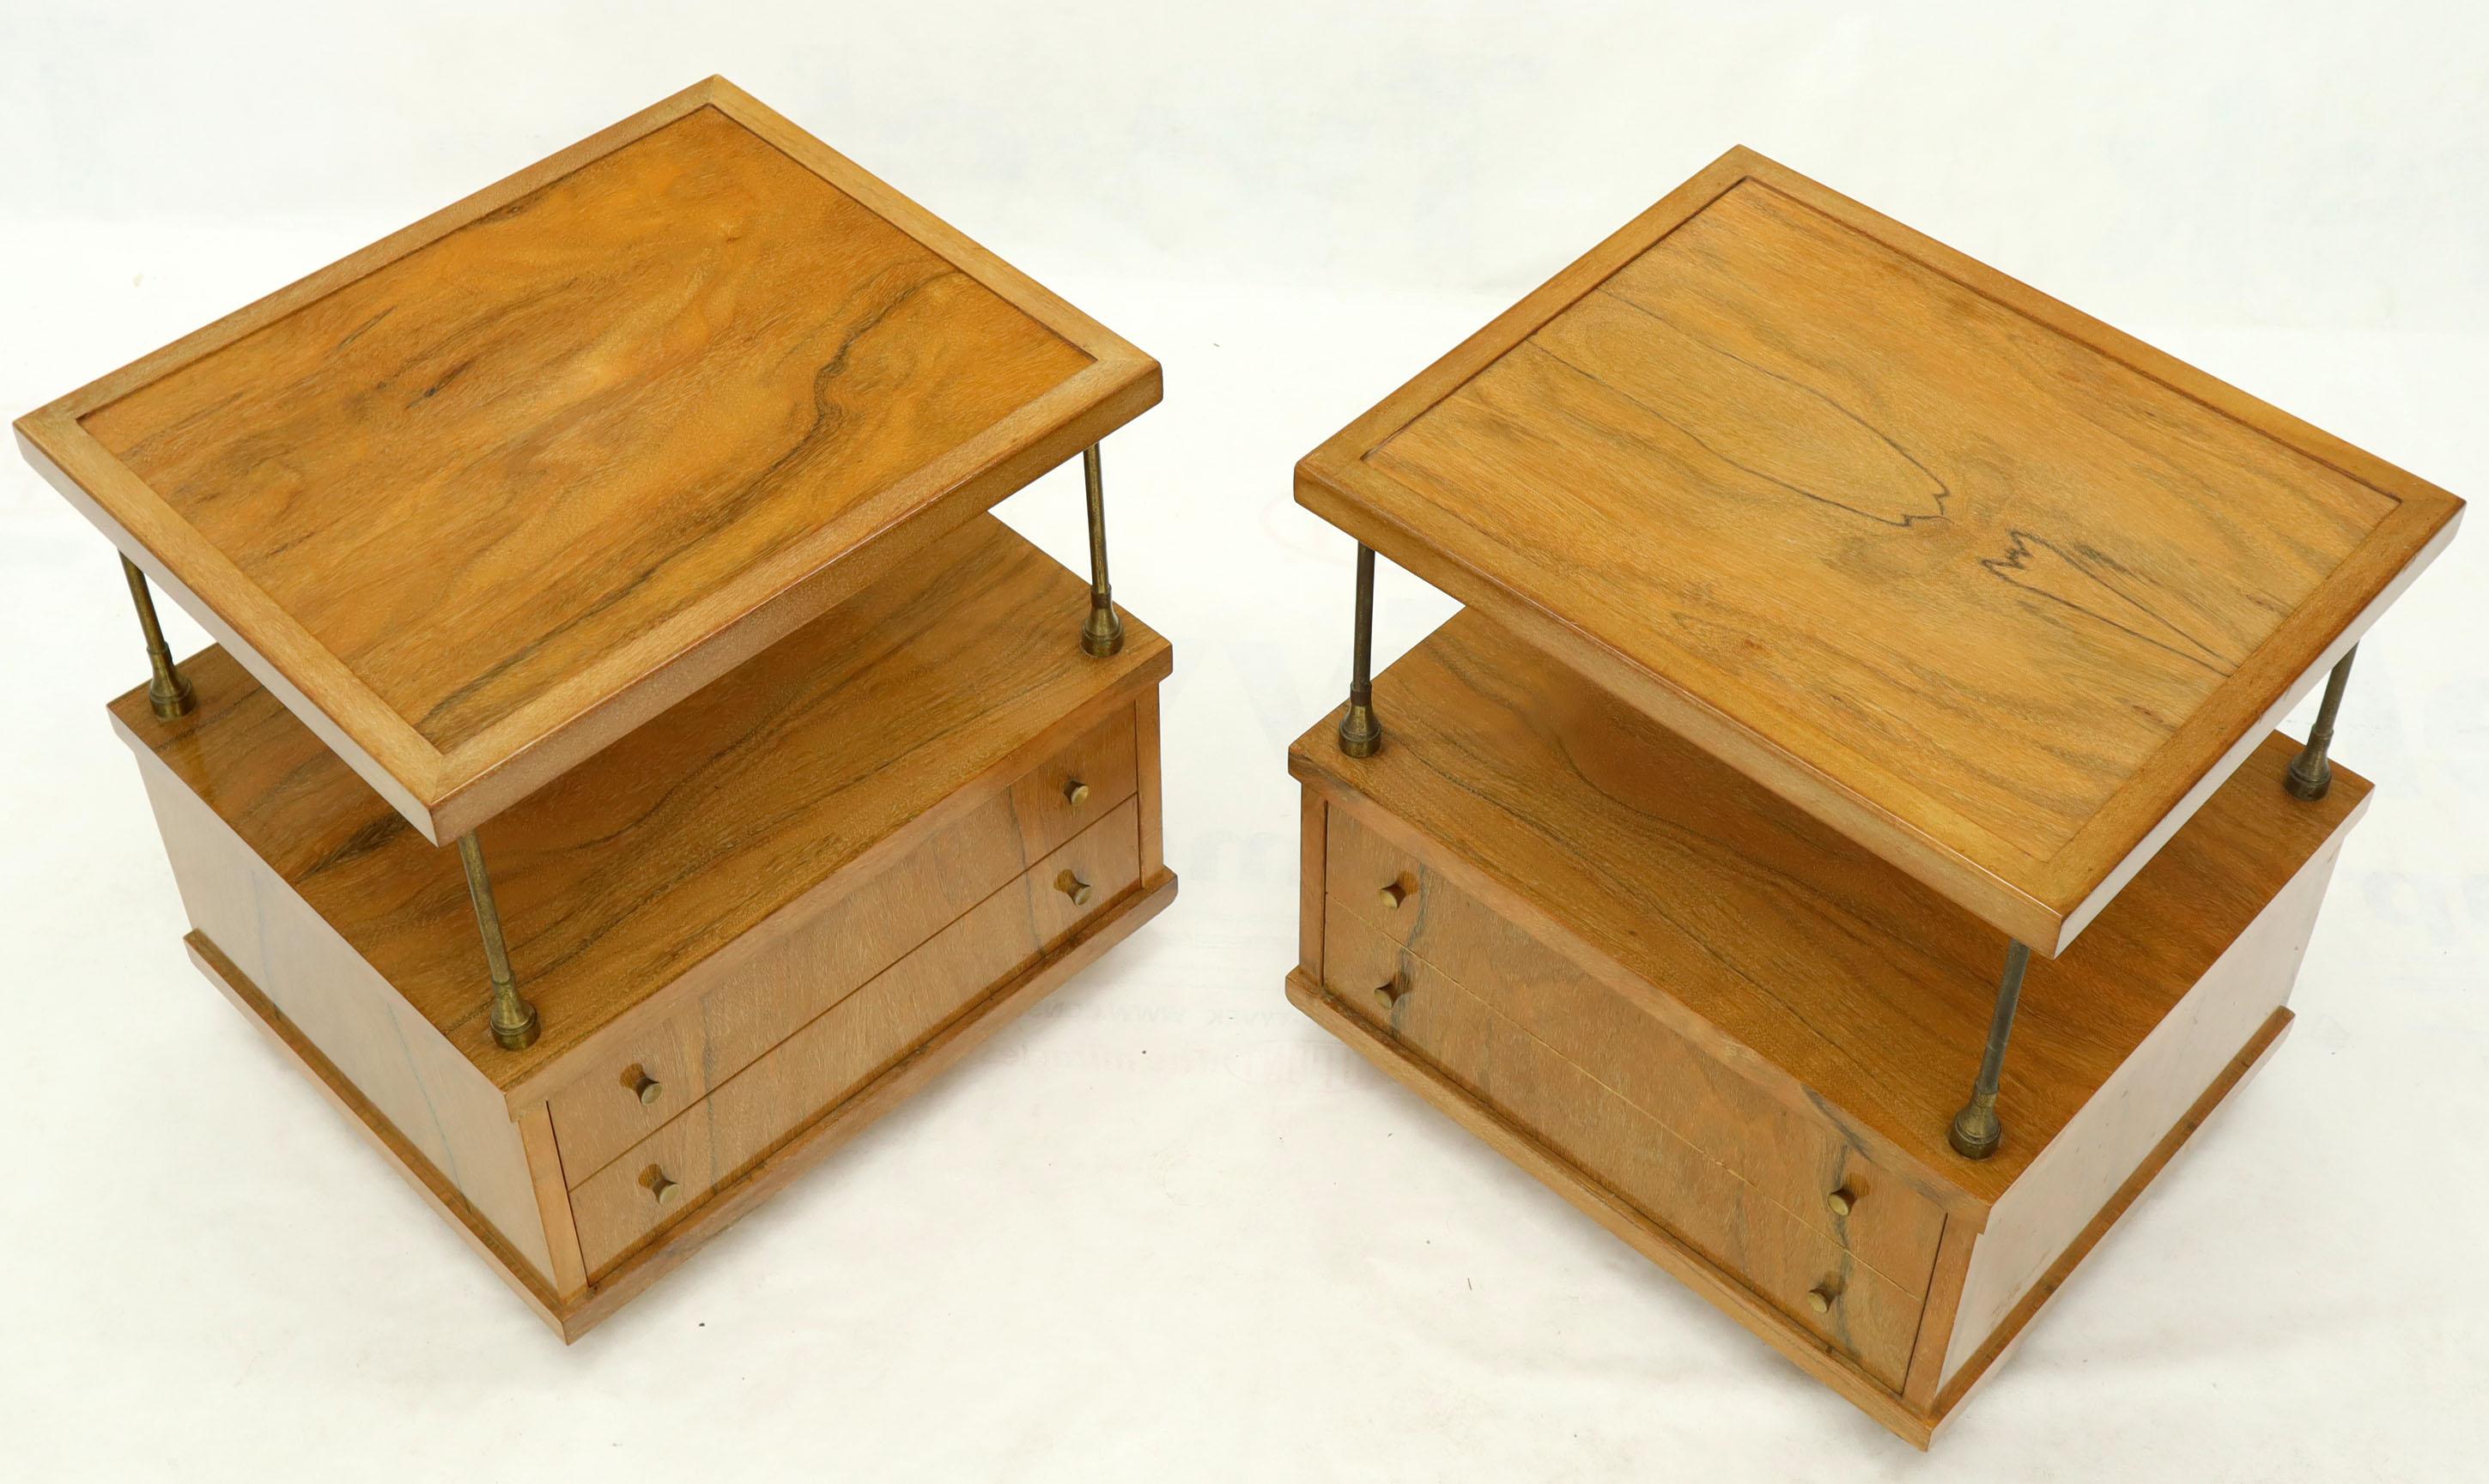 Bleached zebrawood rosewood pair of Mid-Century Modern end tables featuring two sided tops.